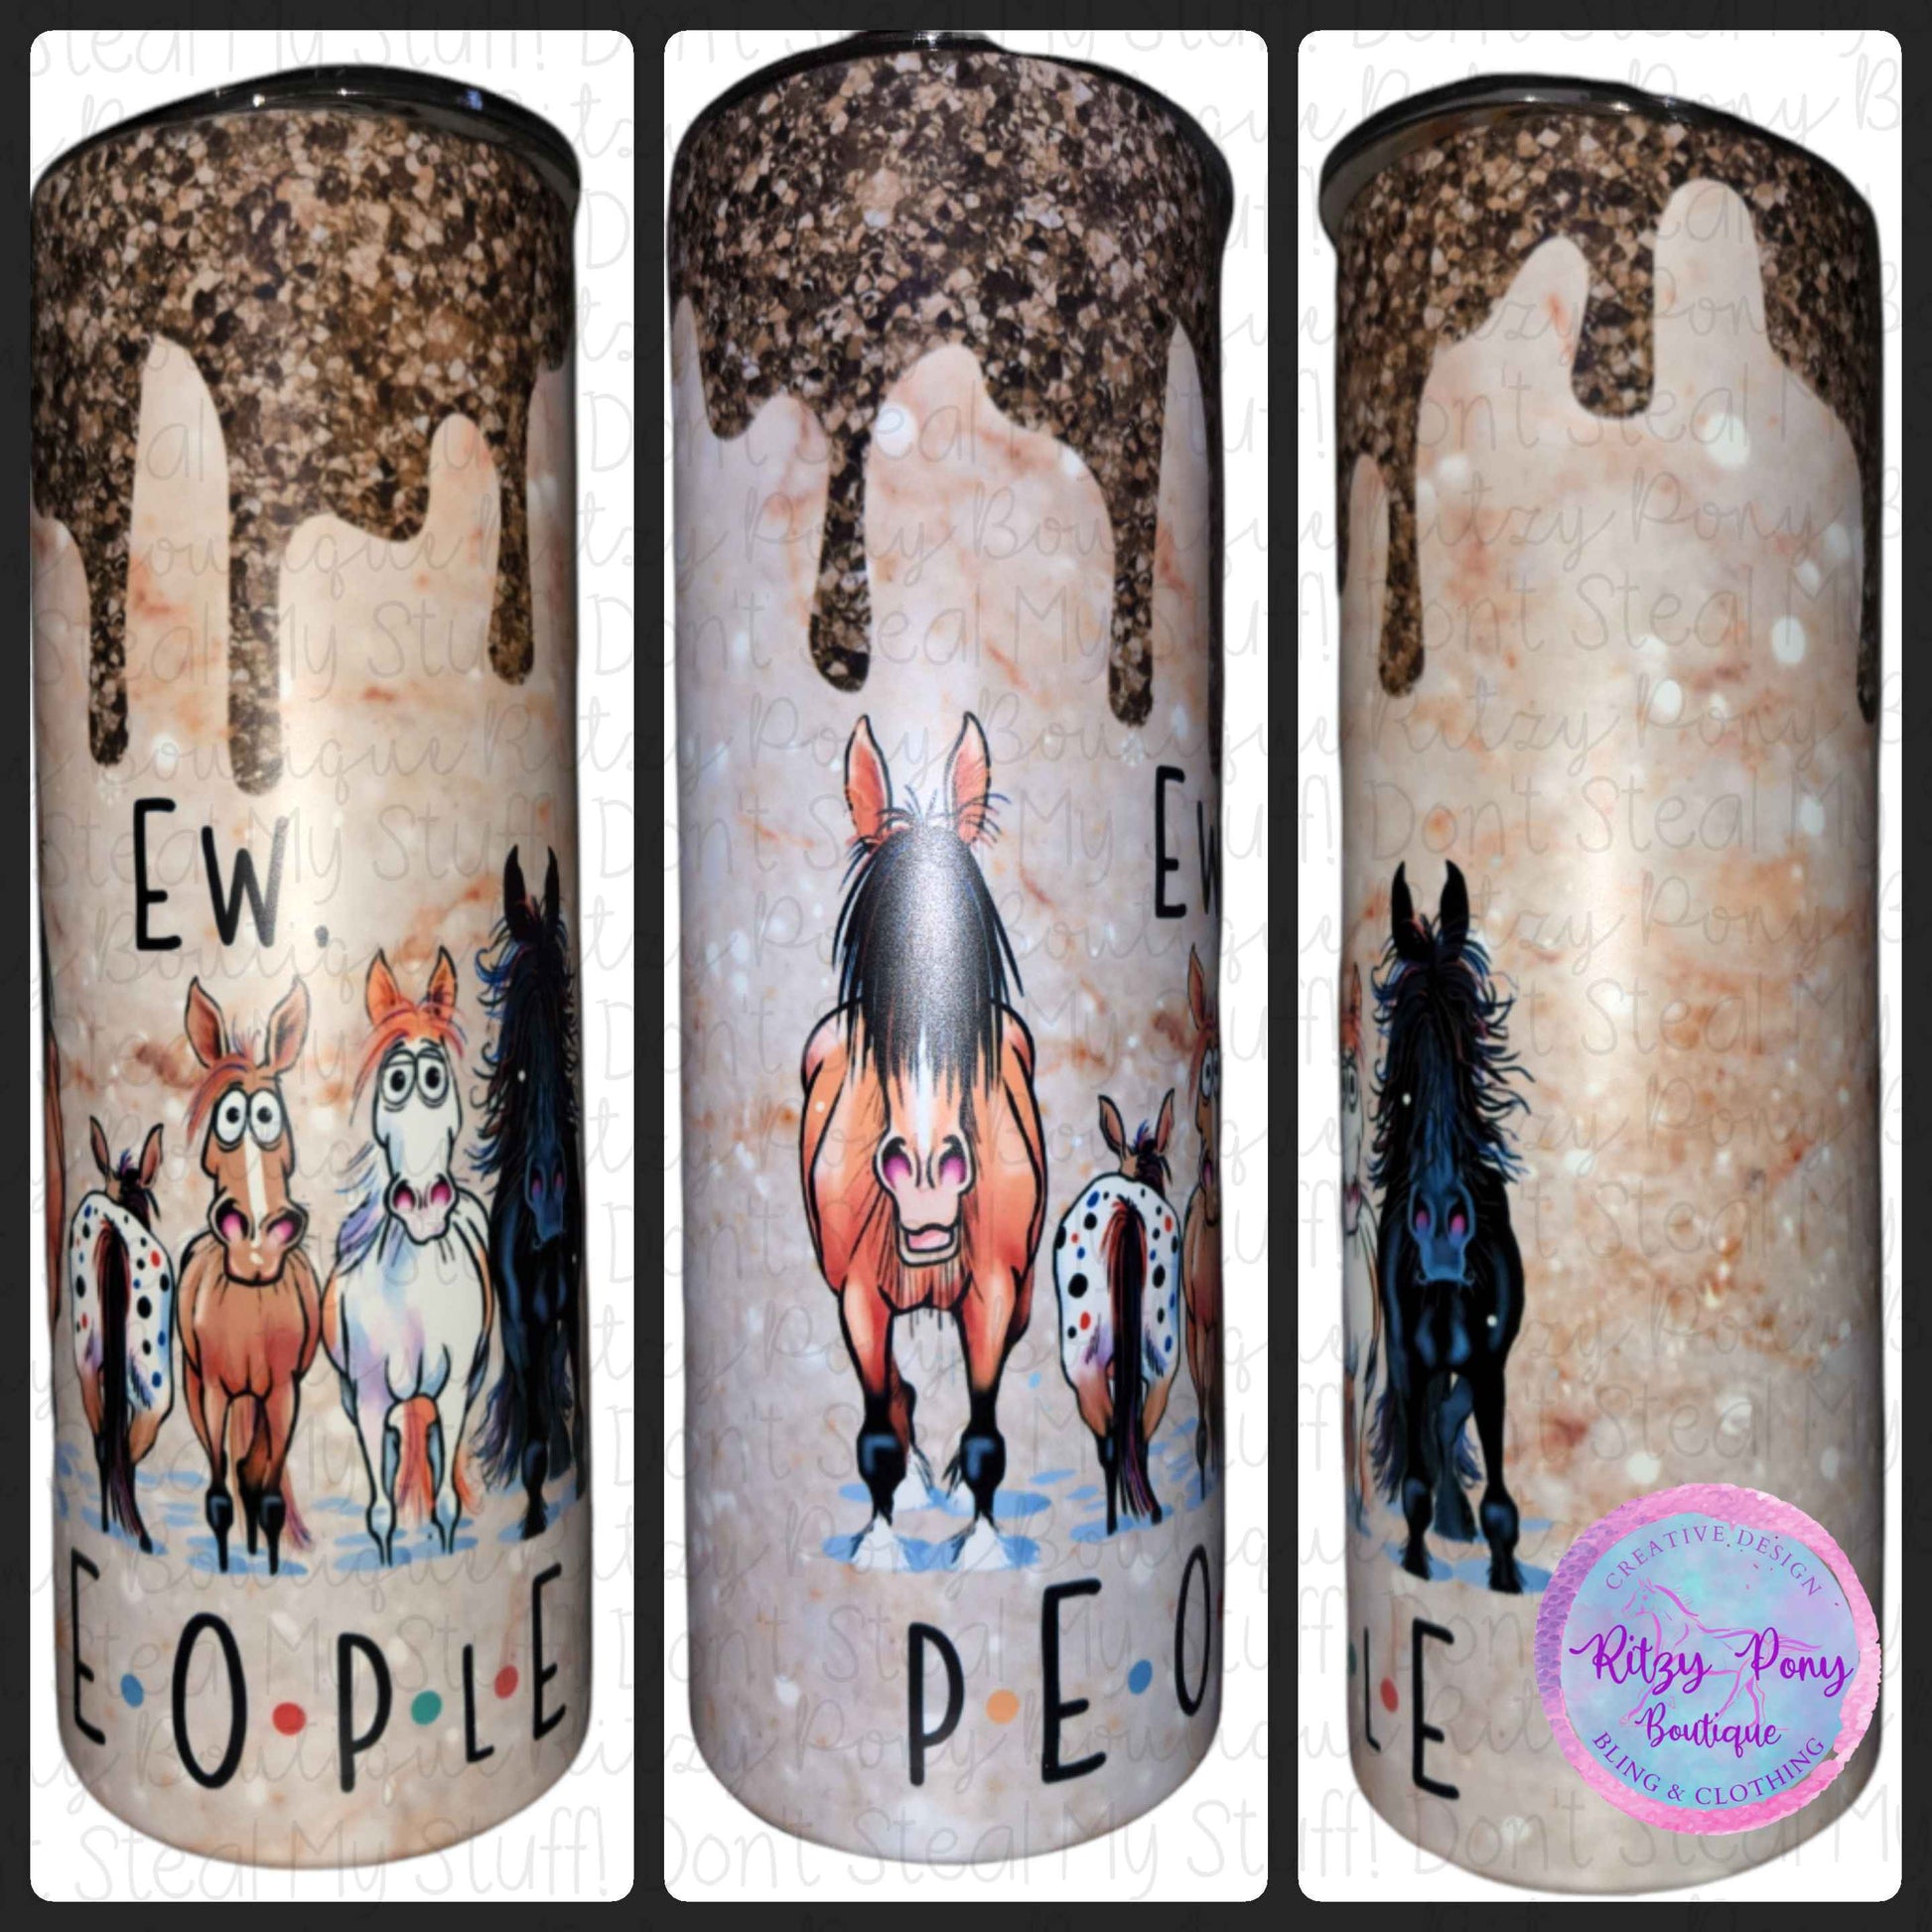 EW PEOPLE Horse Tumbler - The Ritzy Pony Boutique